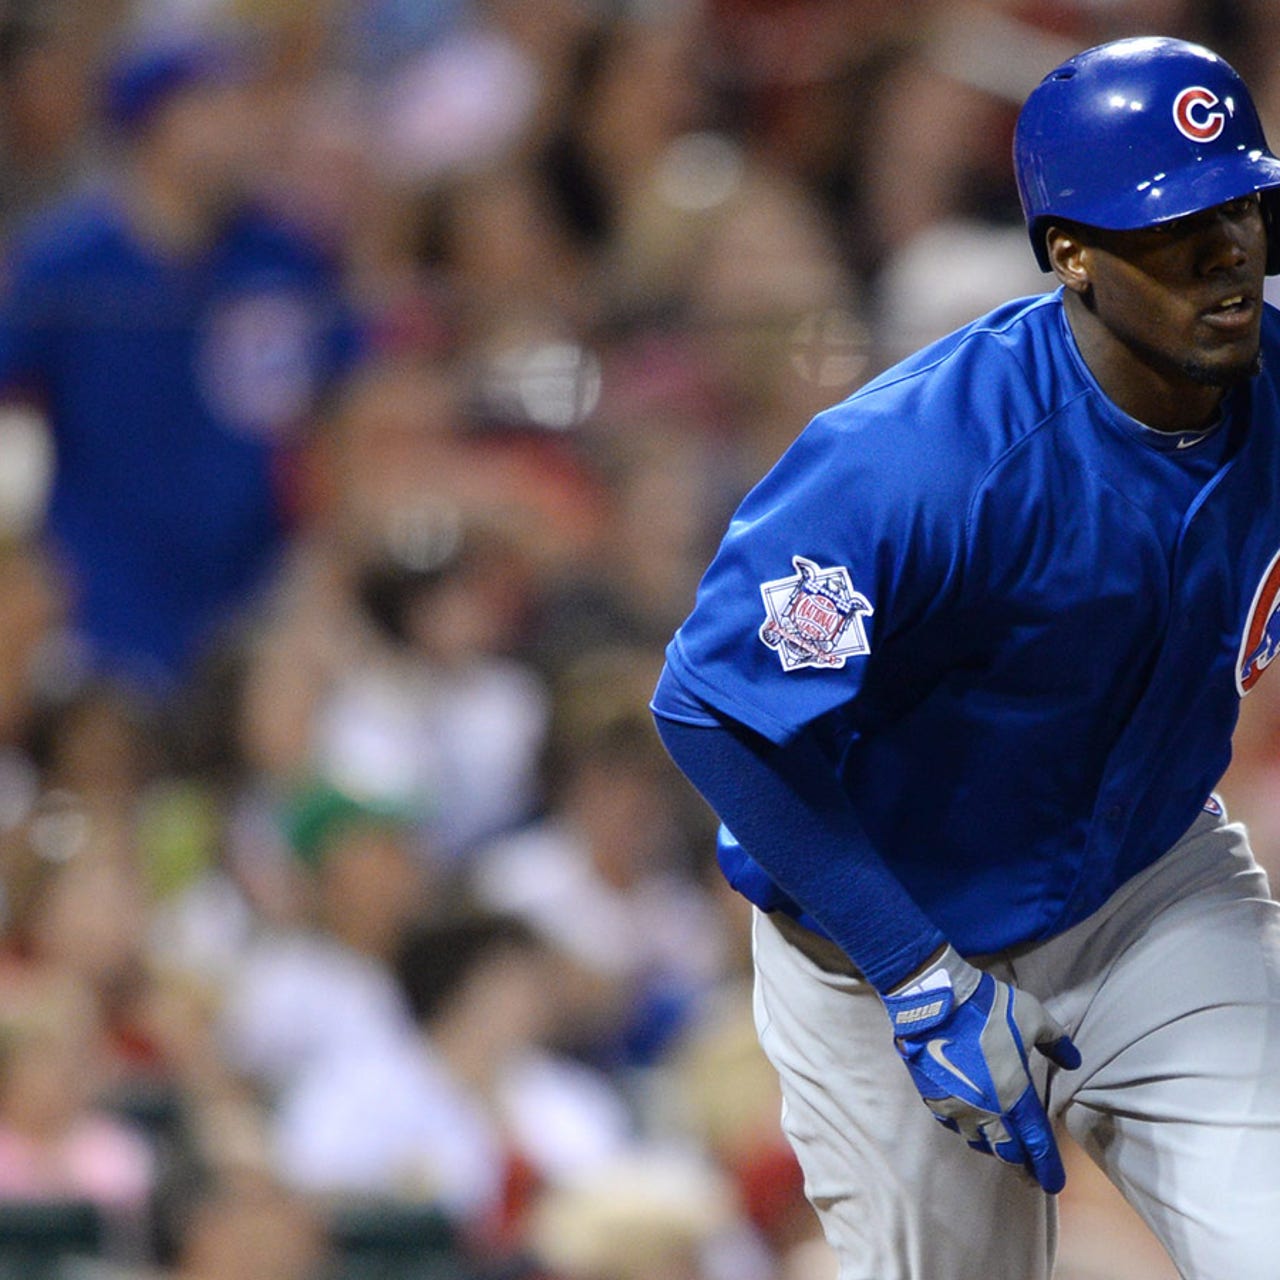 Cubs' Jorge Soler wants his strength to translate to more home runs